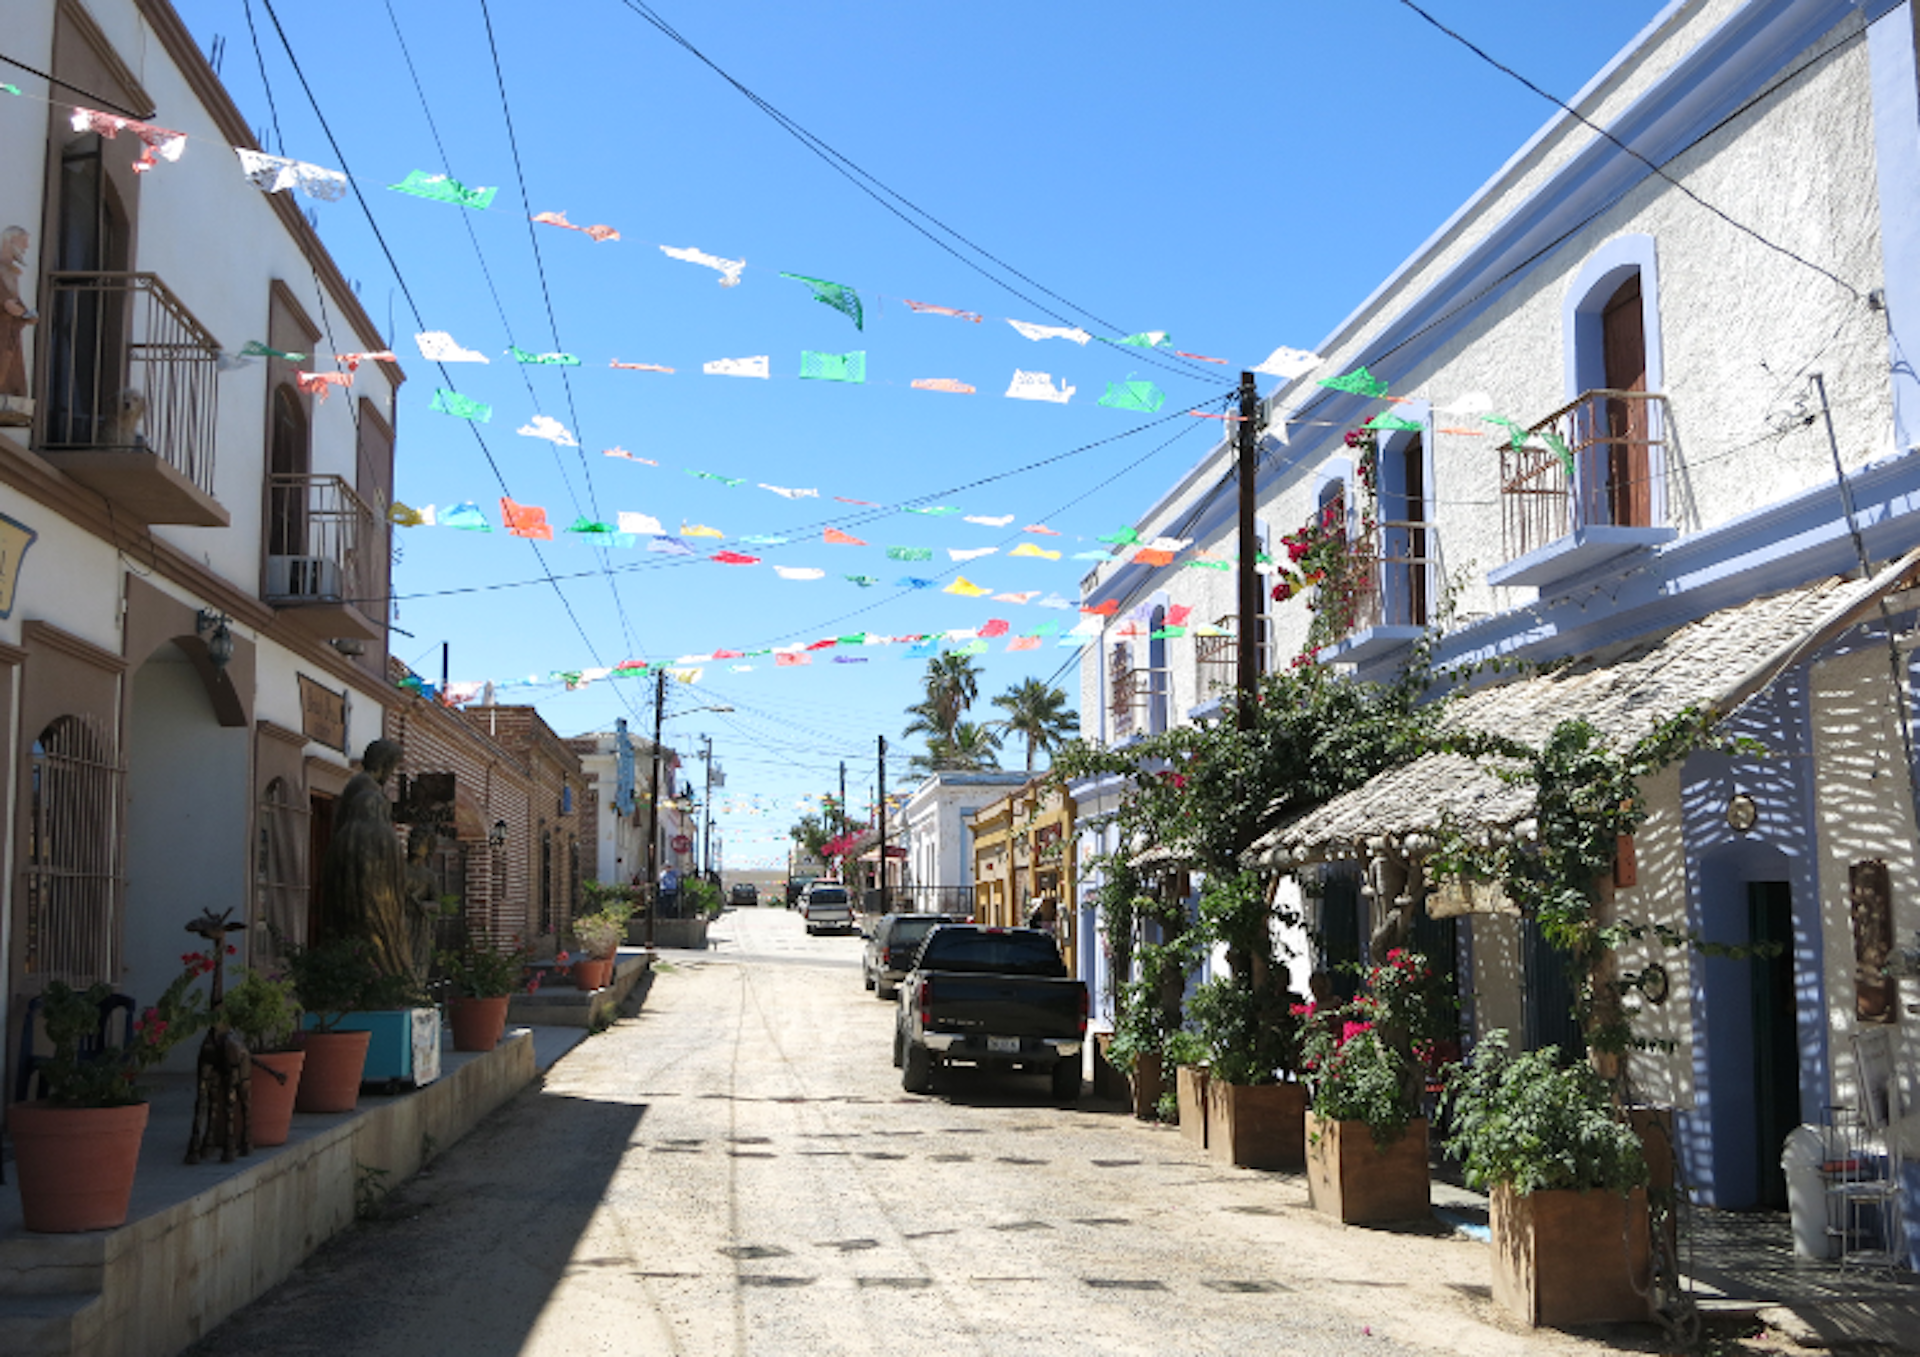 Pretty Todos Santos is a great base for exploring Baja California Sur. Image by Clifton Wilkinson / Lonely Planet.